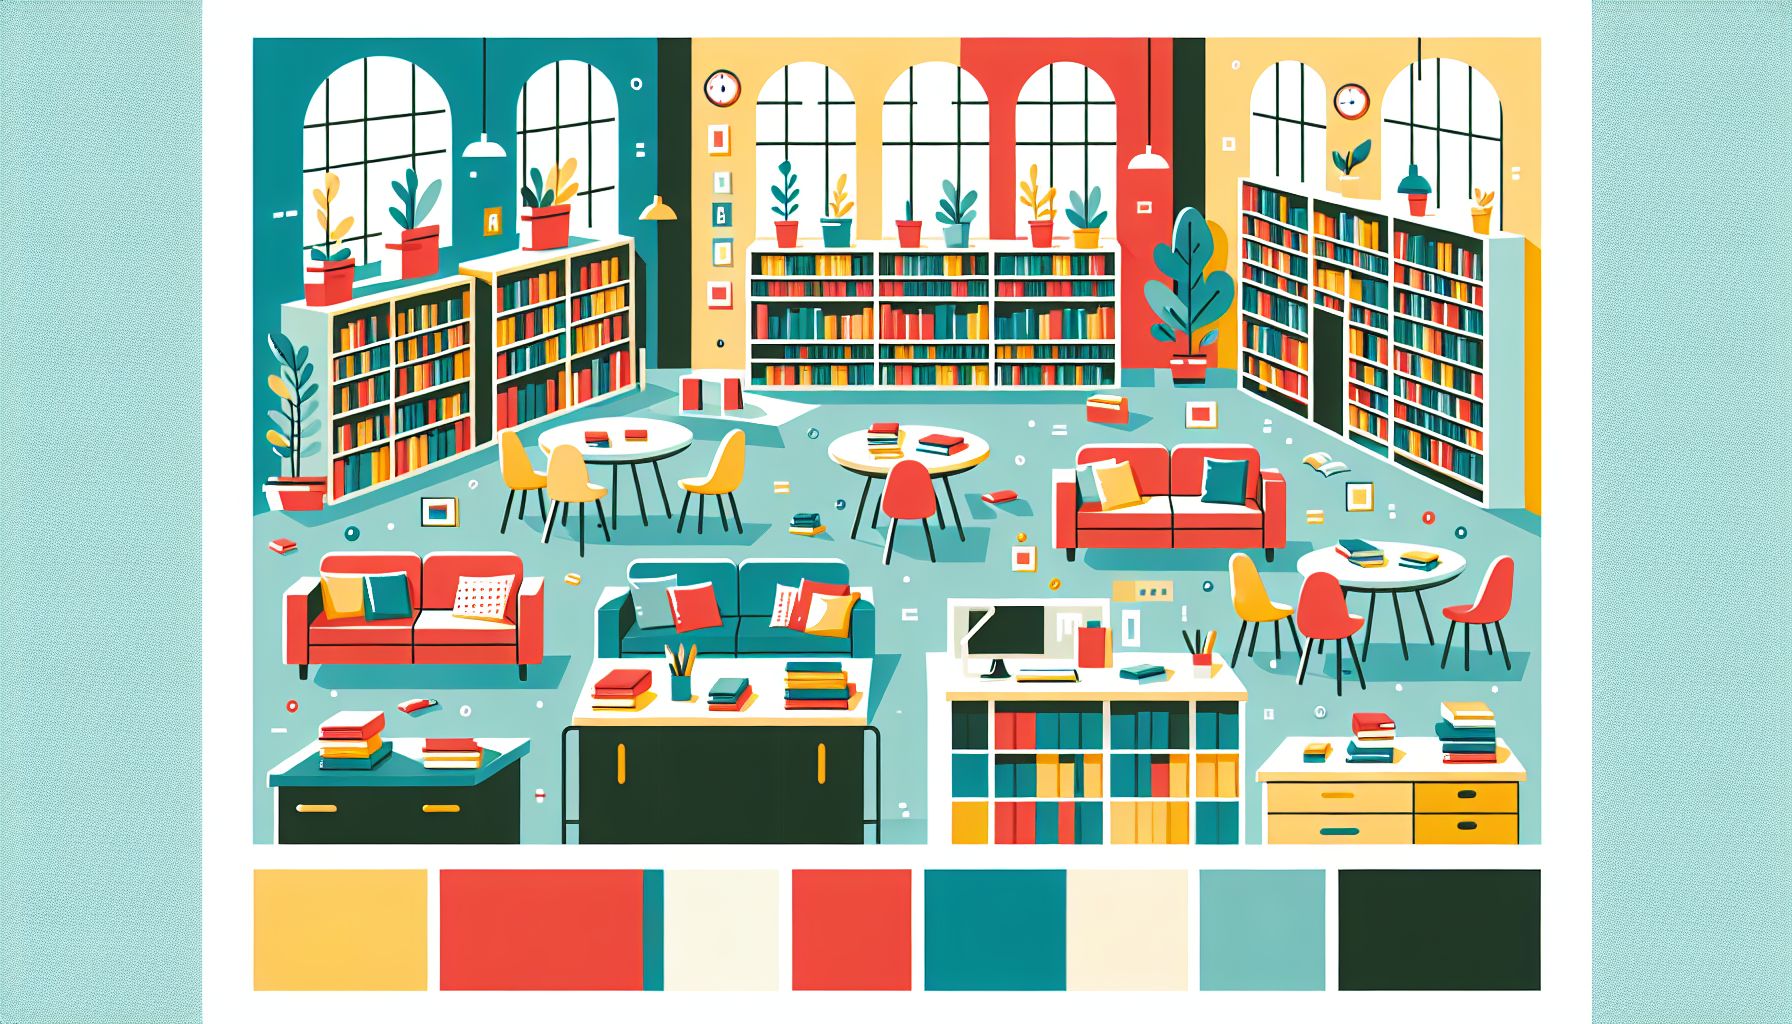 Library in flat illustration style and white background, red #f47574, green #88c7a8, yellow #fcc44b, and blue #645bc8 colors.